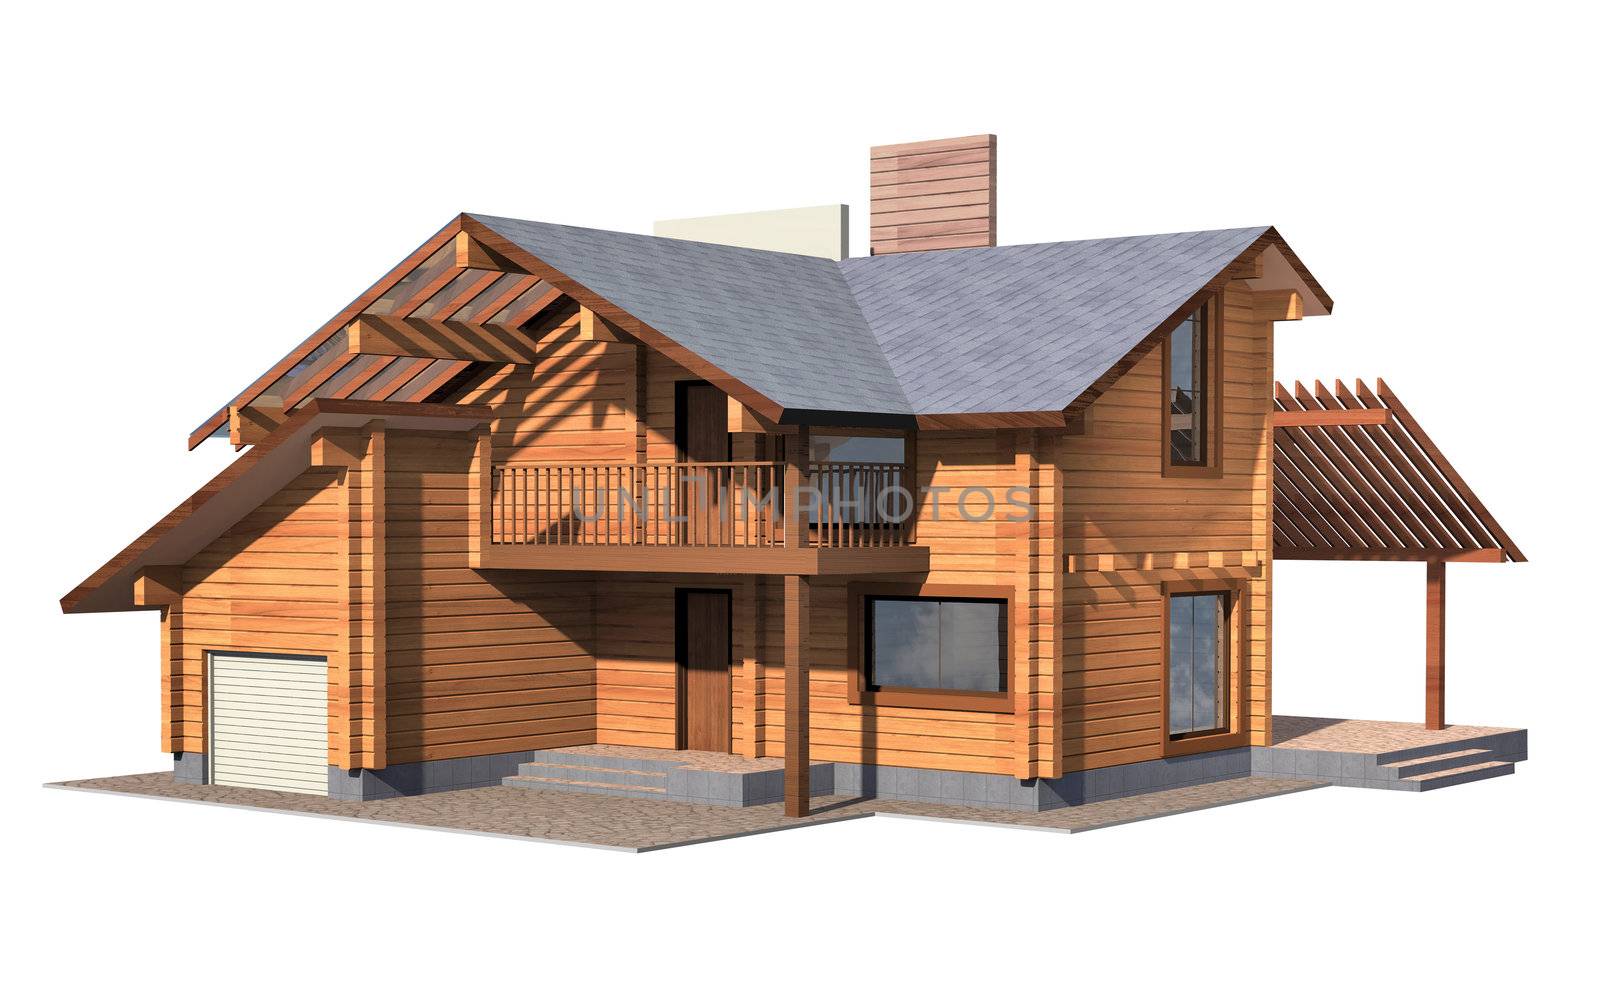 Residential house of wooden timber. 3d model render. Isolation on white background. Real estate